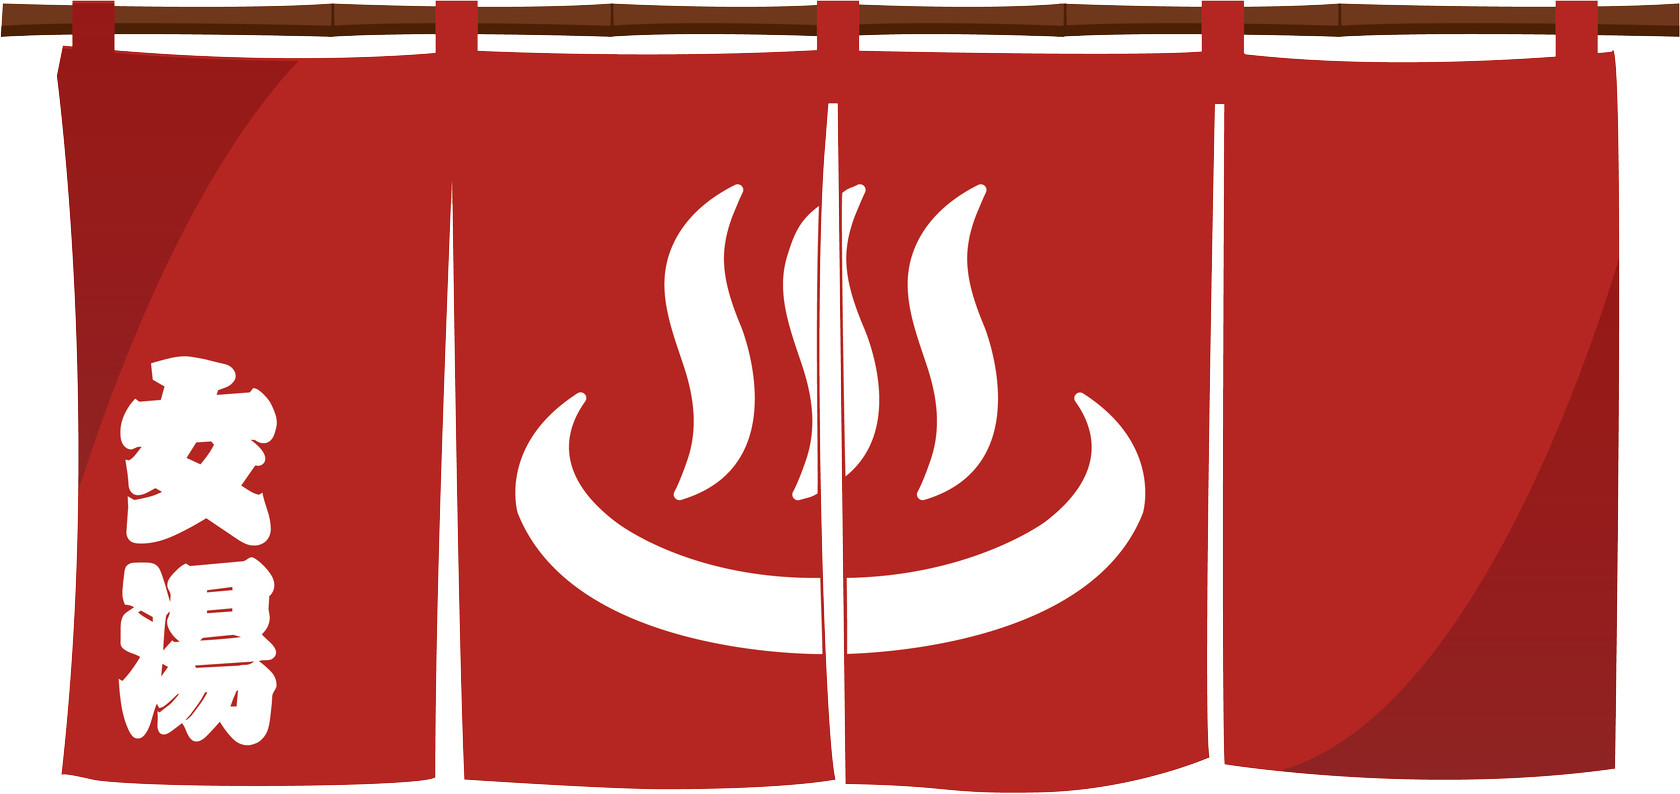 An illustration of a red "noren" flag used to mark the entrance to a female hot-spring. The flag has the Japanese characters 女湯 printed on it.